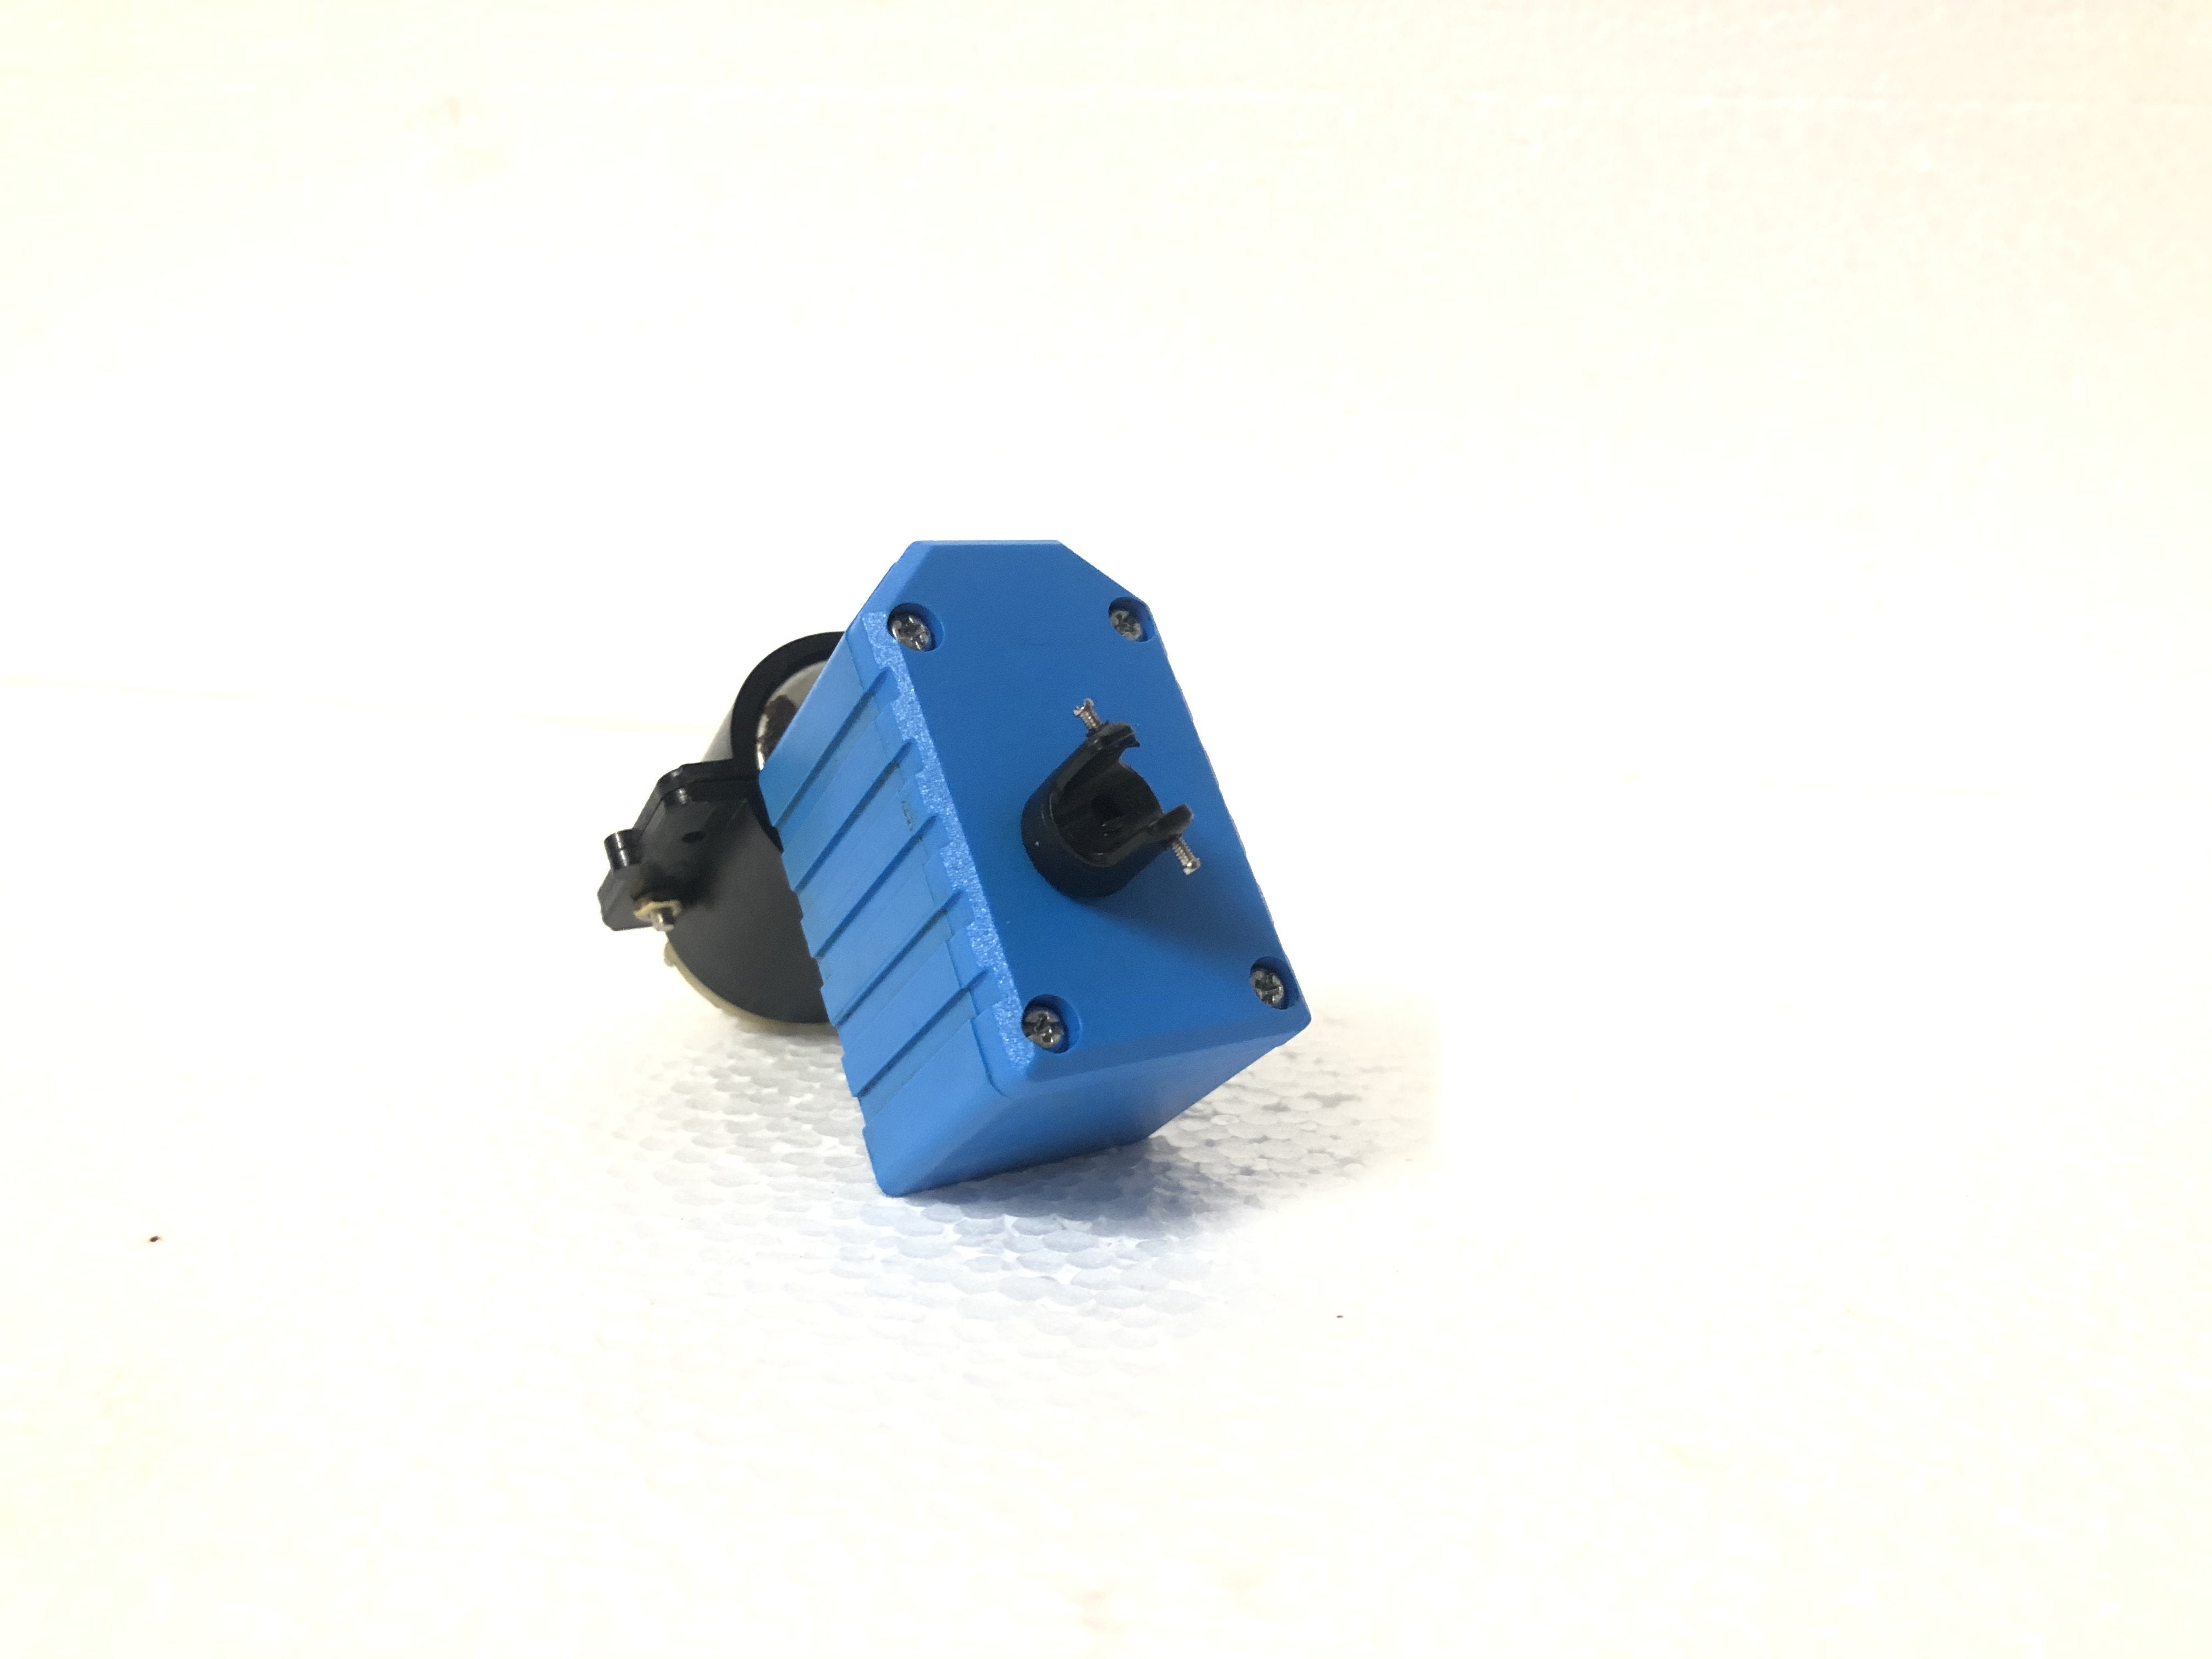 RC Truck Gearbox - Constant mesh, 1000 RPM output shaft. Gear ration 2.9